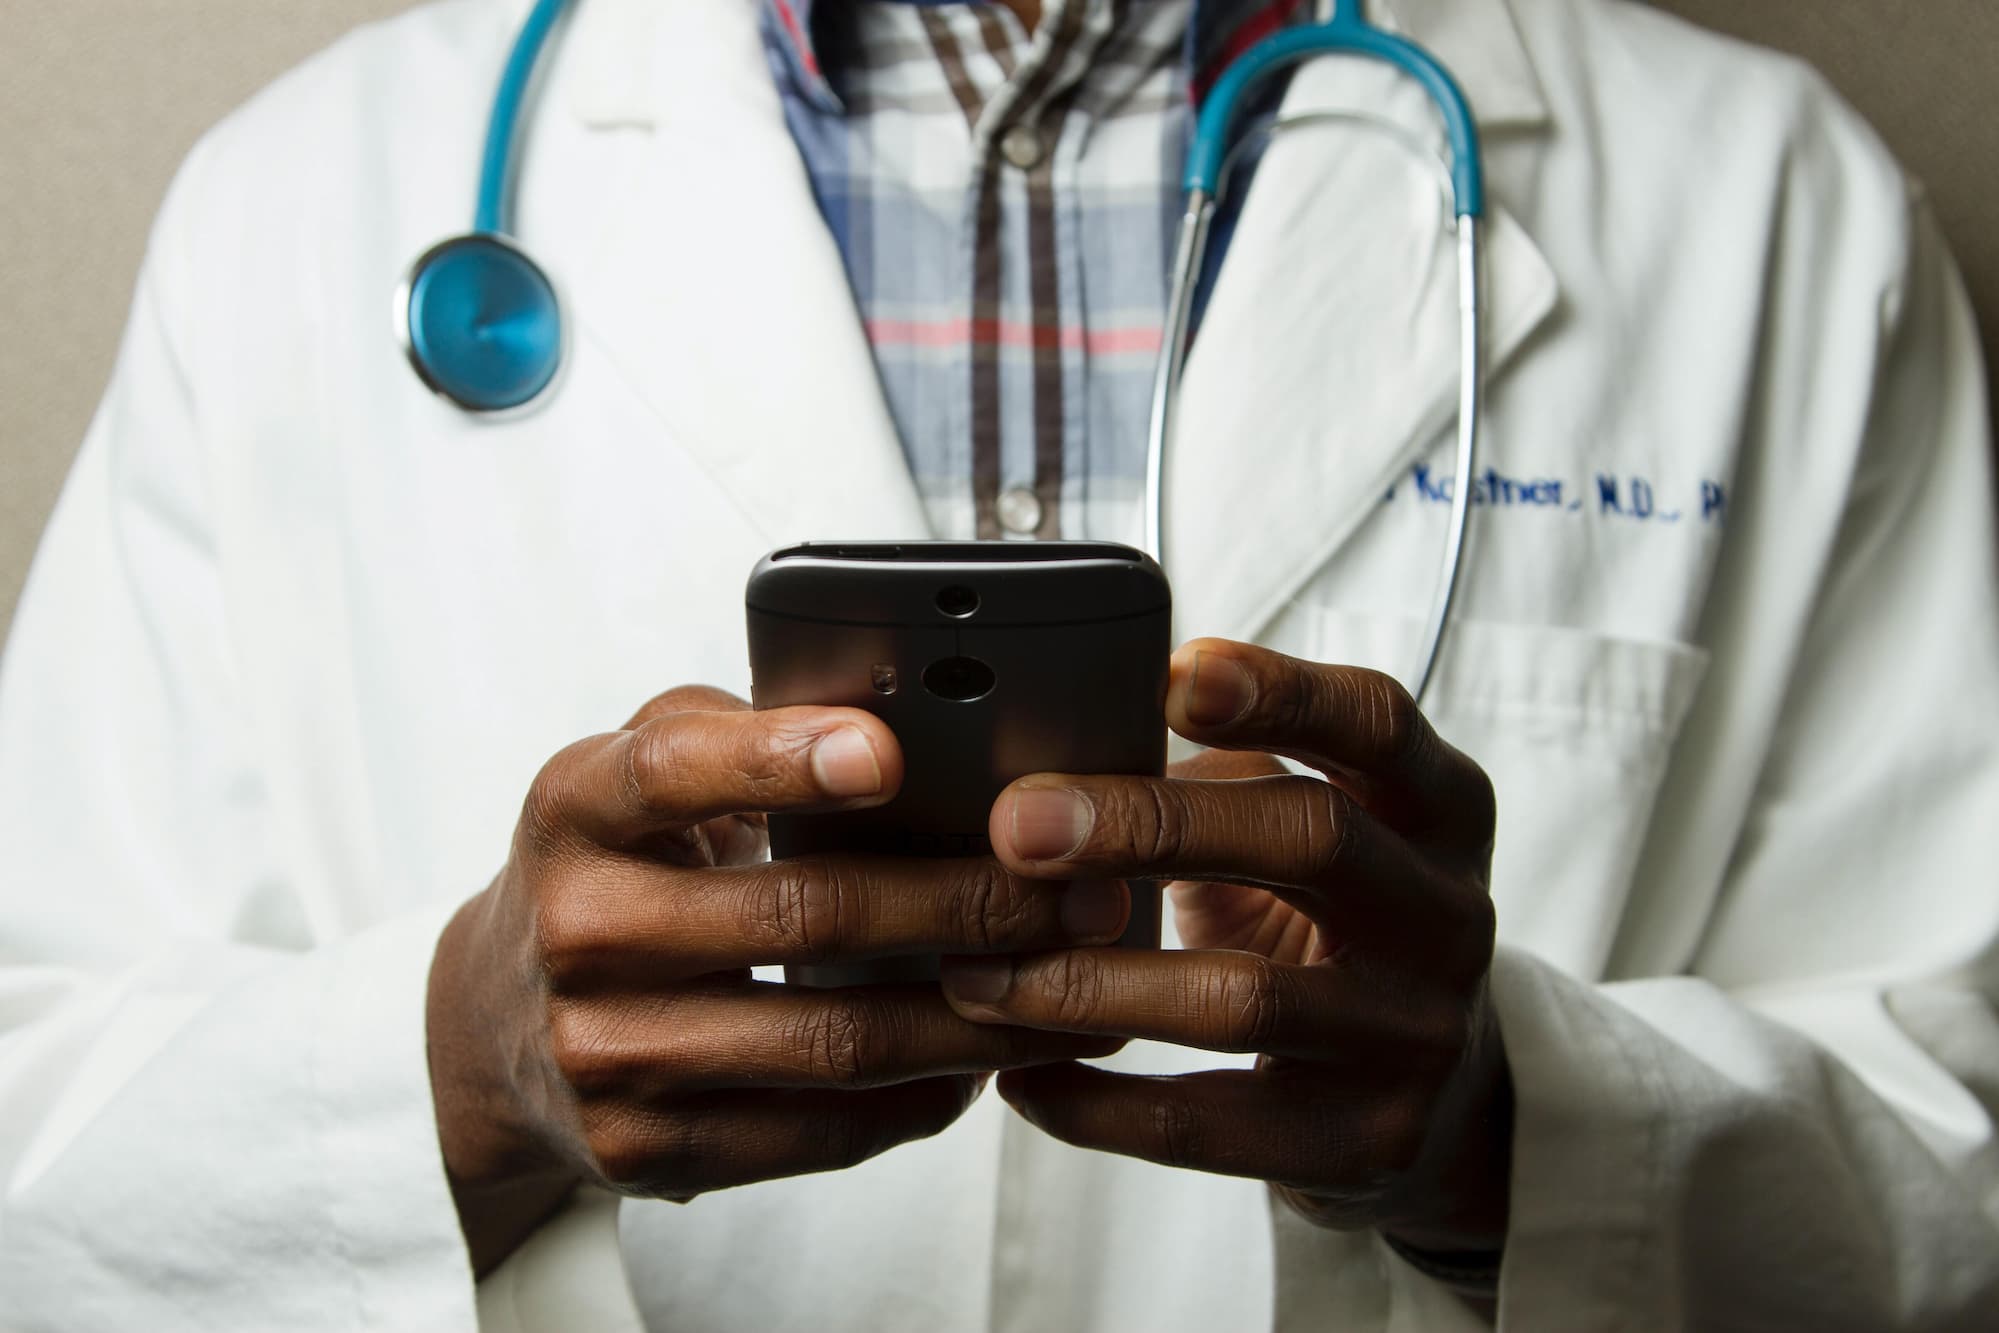 Hands of a doctor in a while overall, with a stethoscope around his neck, holding a smartphone